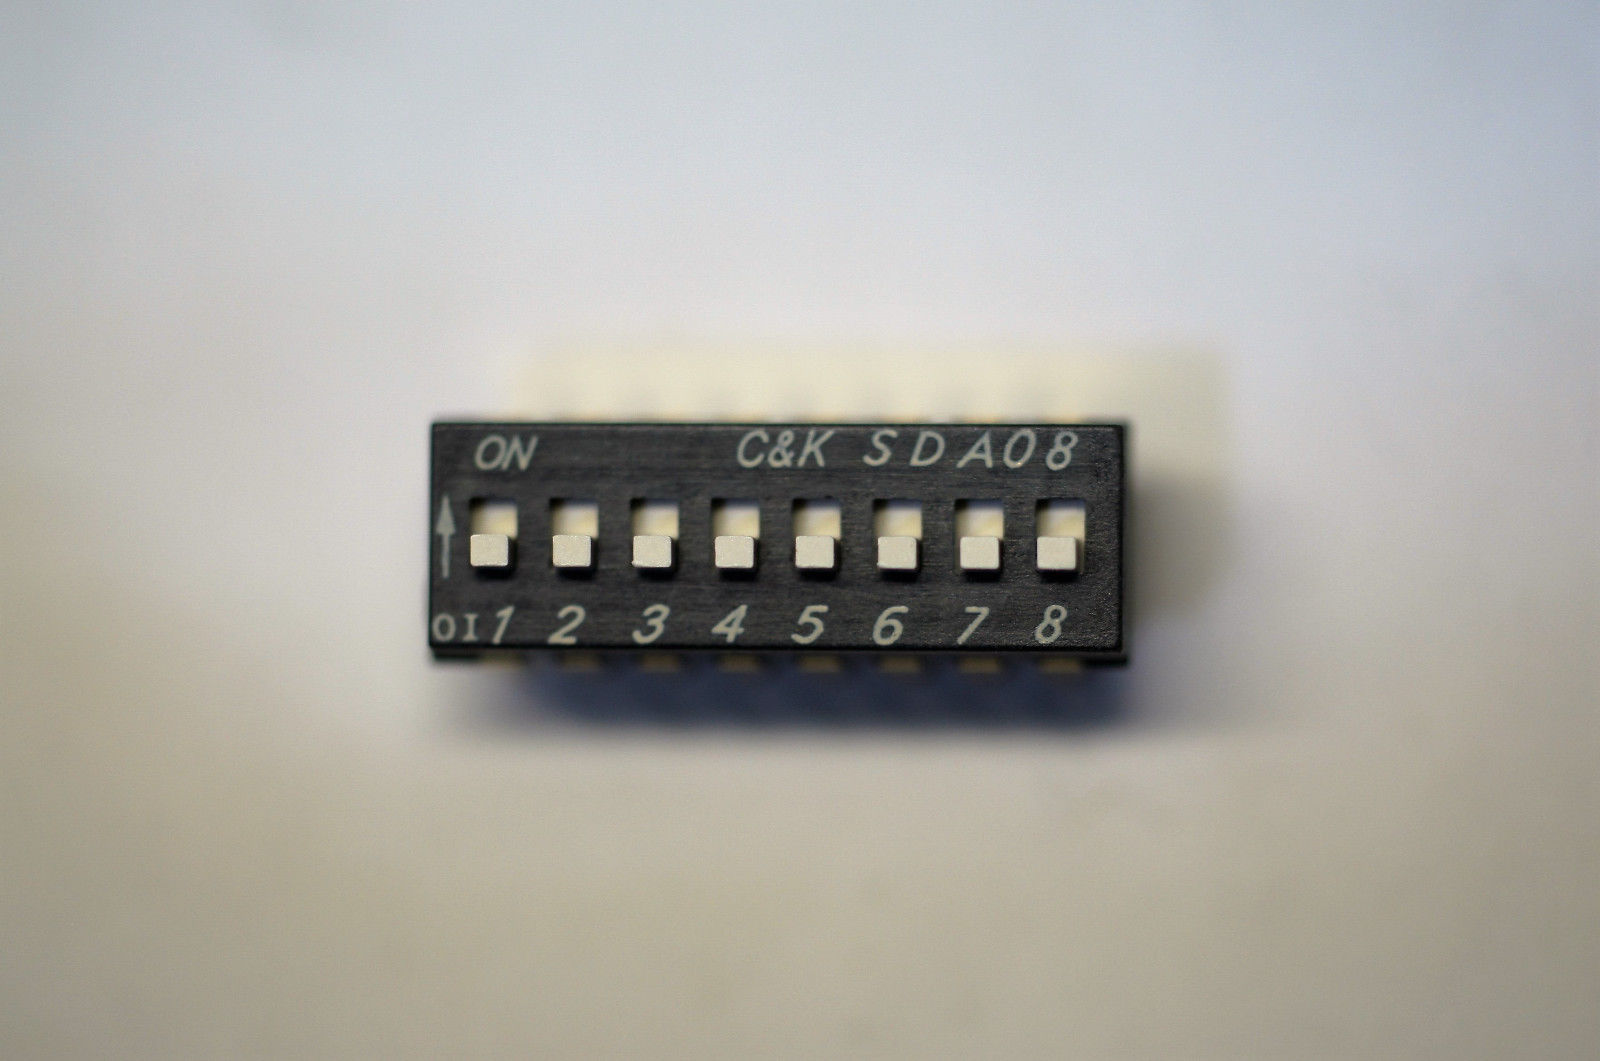 [black 8 position DIP switch - 
click for larger version]